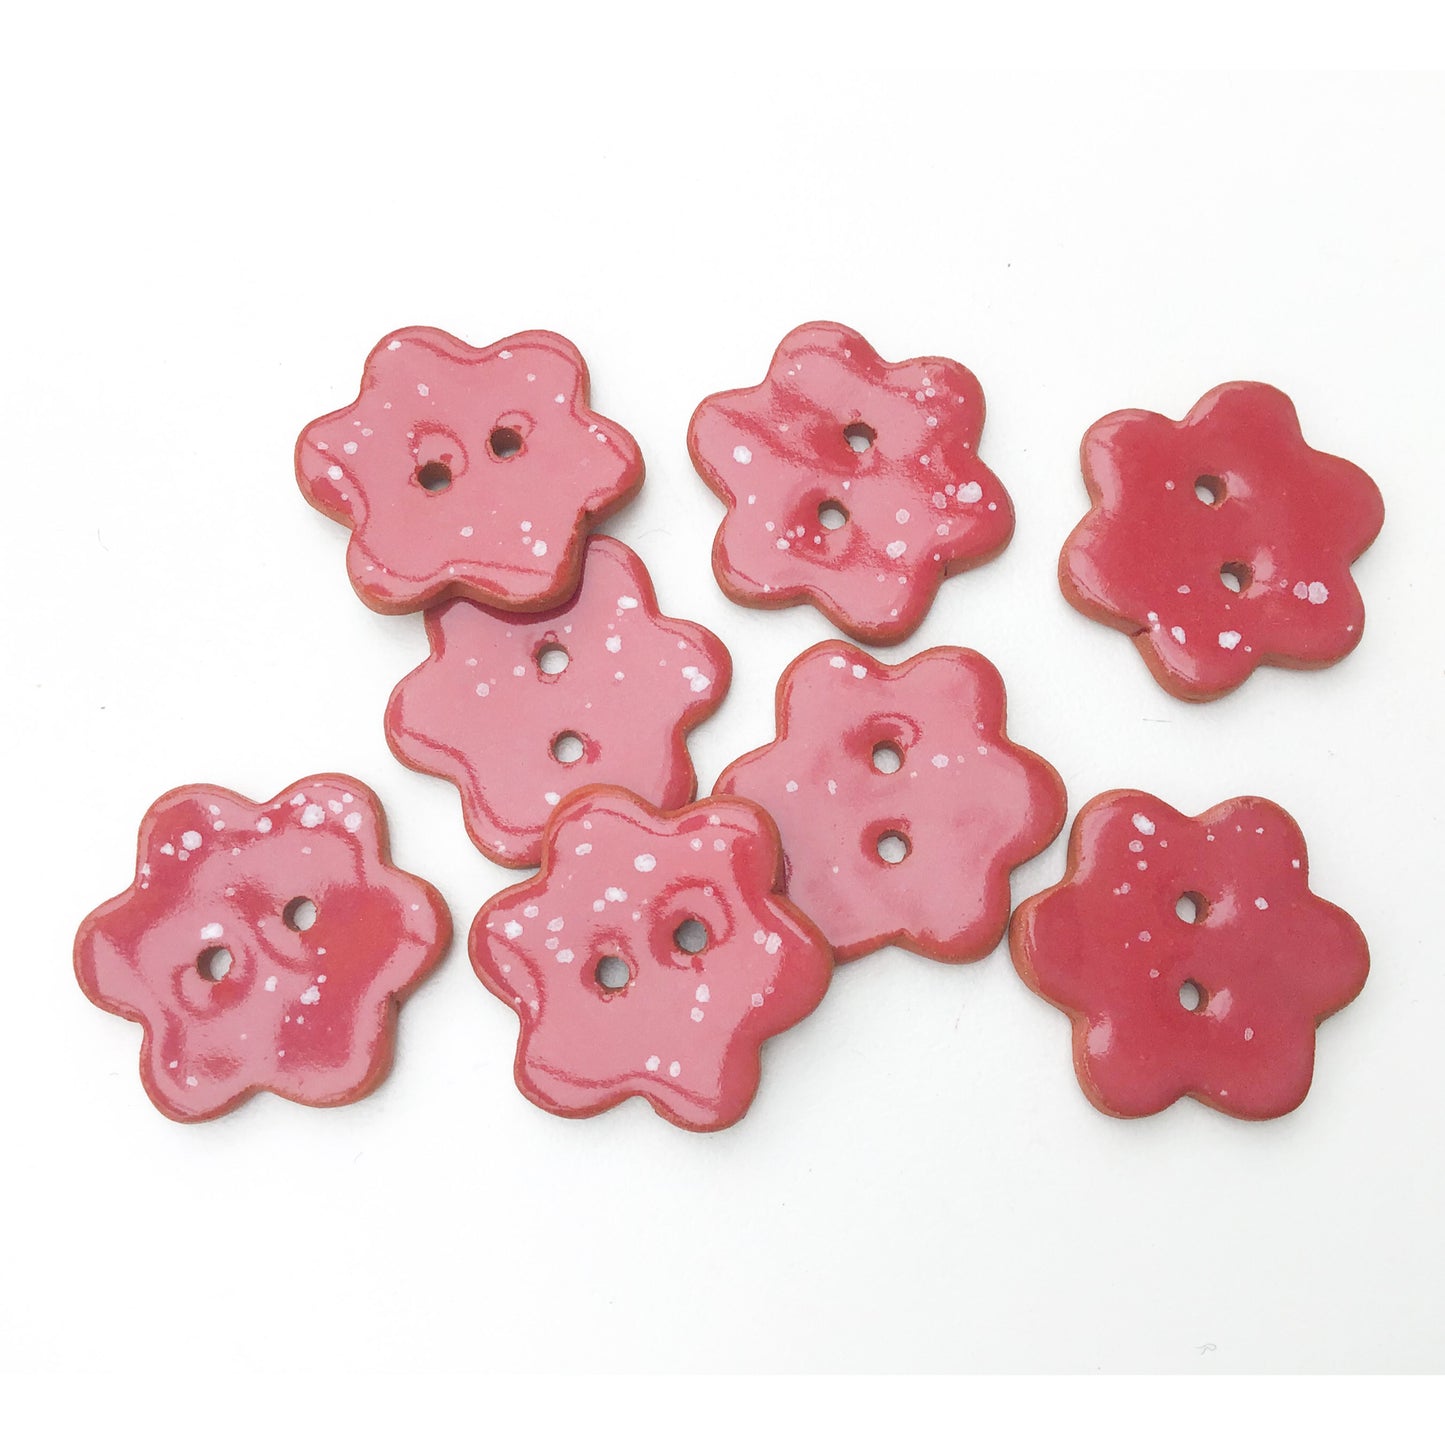 Red Flower Buttons with White Speckles - Ceramic Flower Buttons - 7/8" - 8 Pack (ws-177)